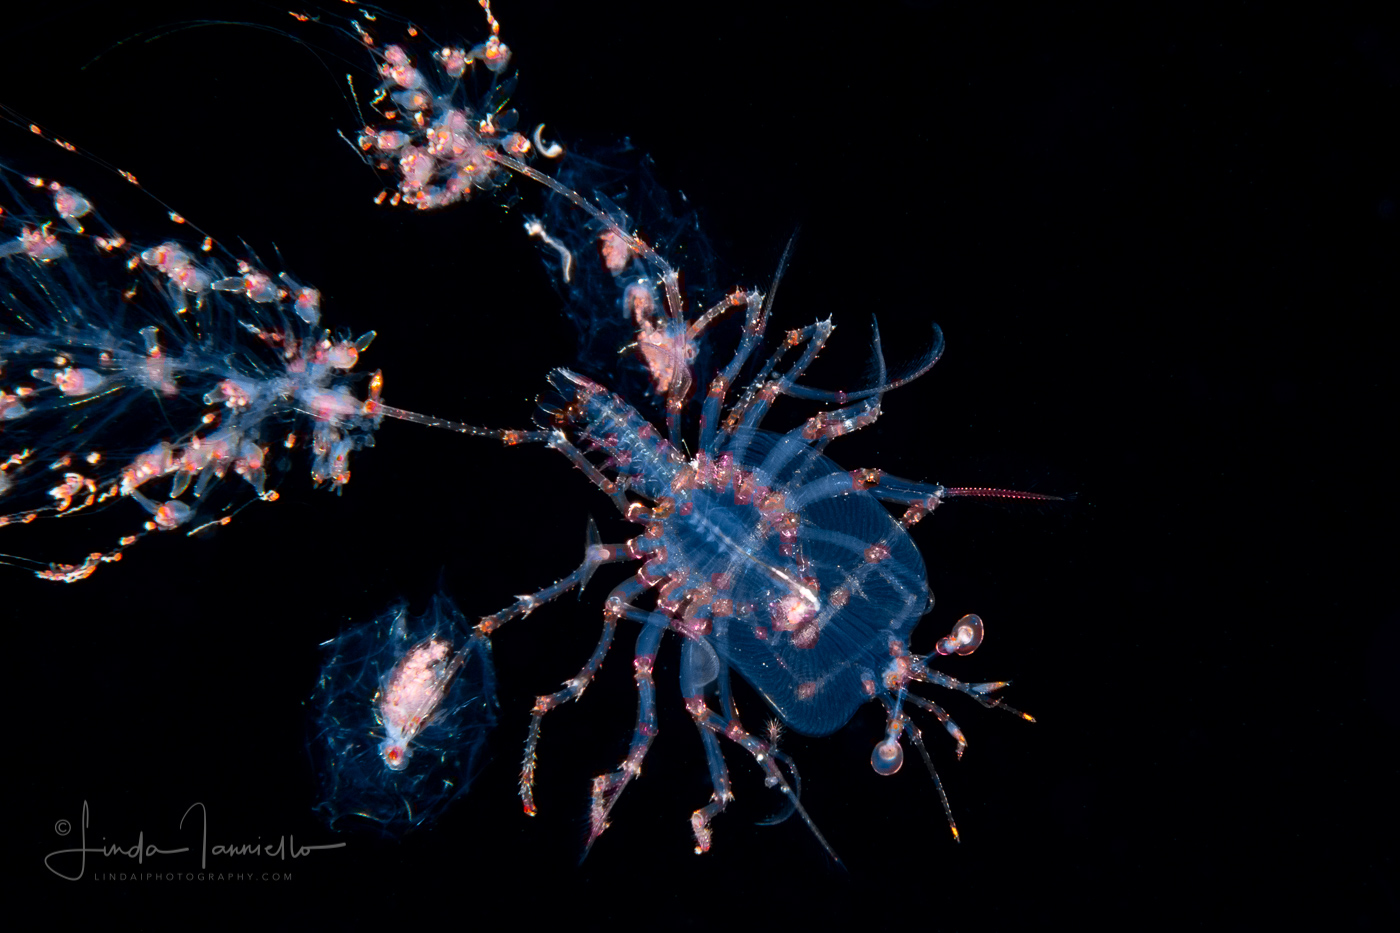 Caribbean Spiny Lobster - Palinuridae - Phyllosoma Stage Larva - with Siphonophores